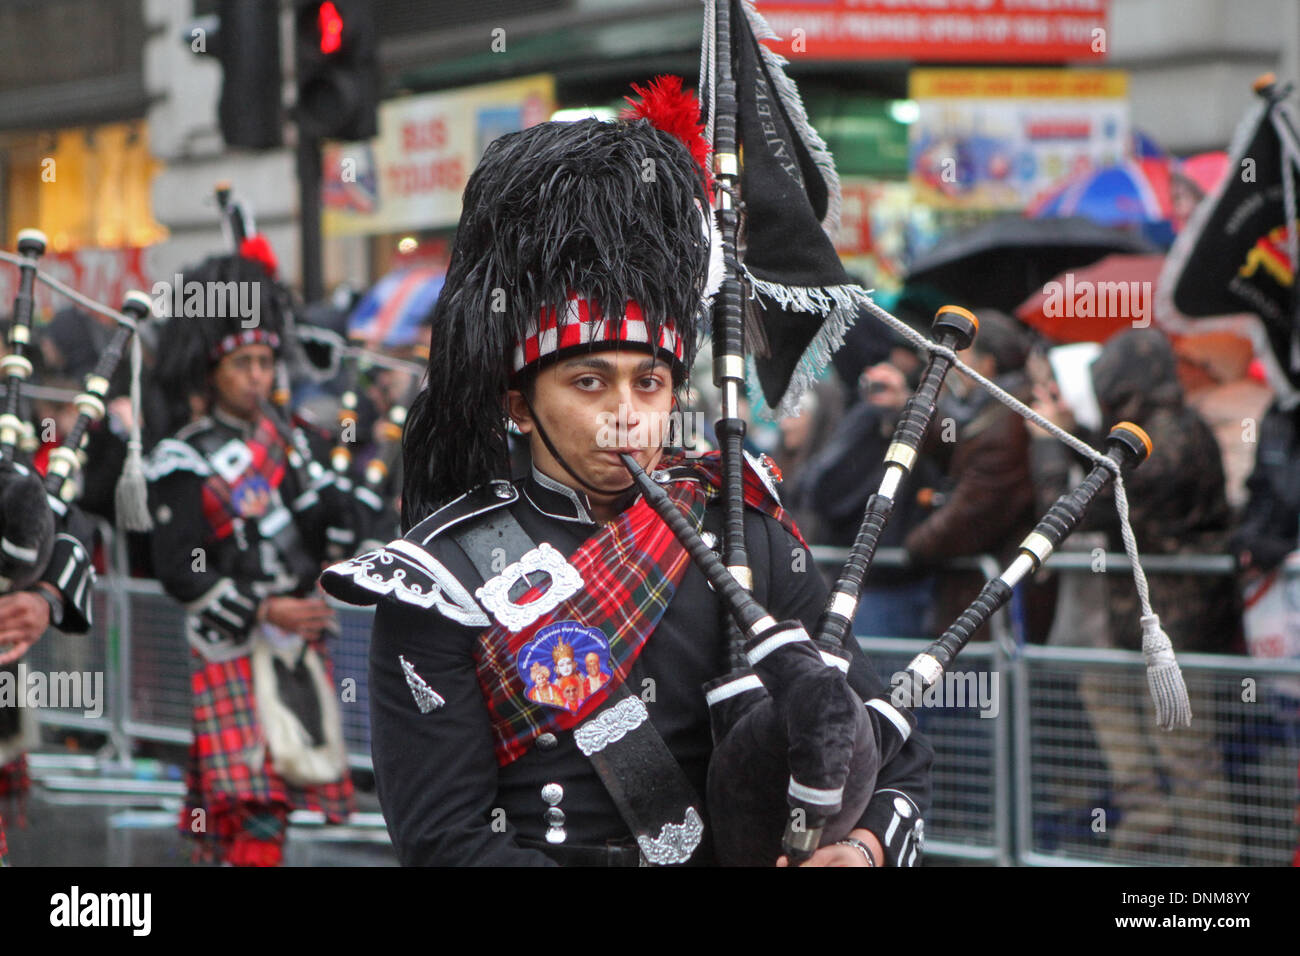 London,UK,1er janvier 2014, Highland Pipers au London's New Year's Day Parade 2014 Credit : Keith Larby/Alamy Live News Banque D'Images